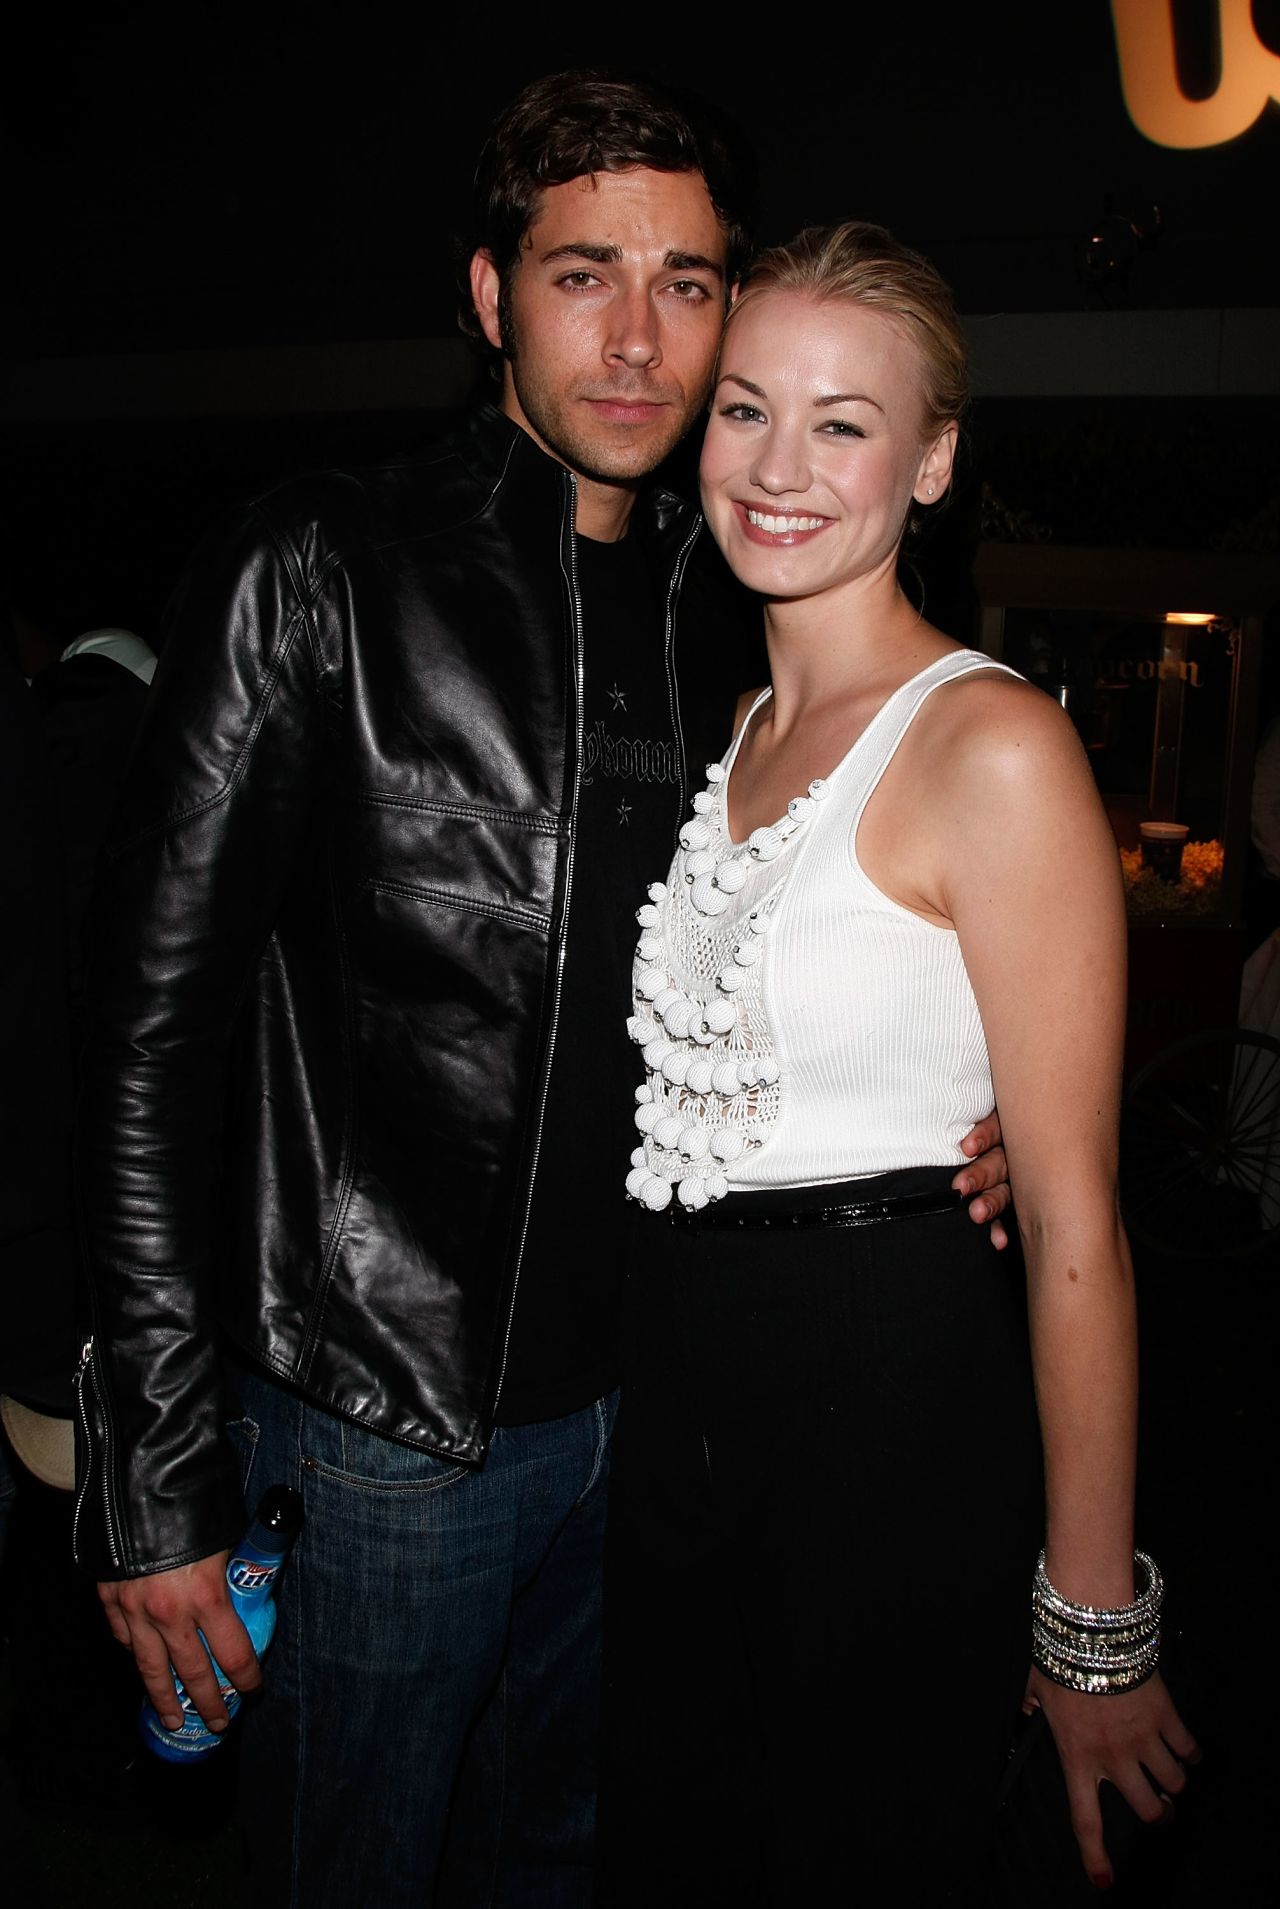 When spy Sarah Walker (Yvonne Strahovski) took Chuck Bartowski (Zachary Levi) under her wing, the show's devoted fans quickly found a couple to cheer on -- all the way until the final bittersweet scene on "Chuck."